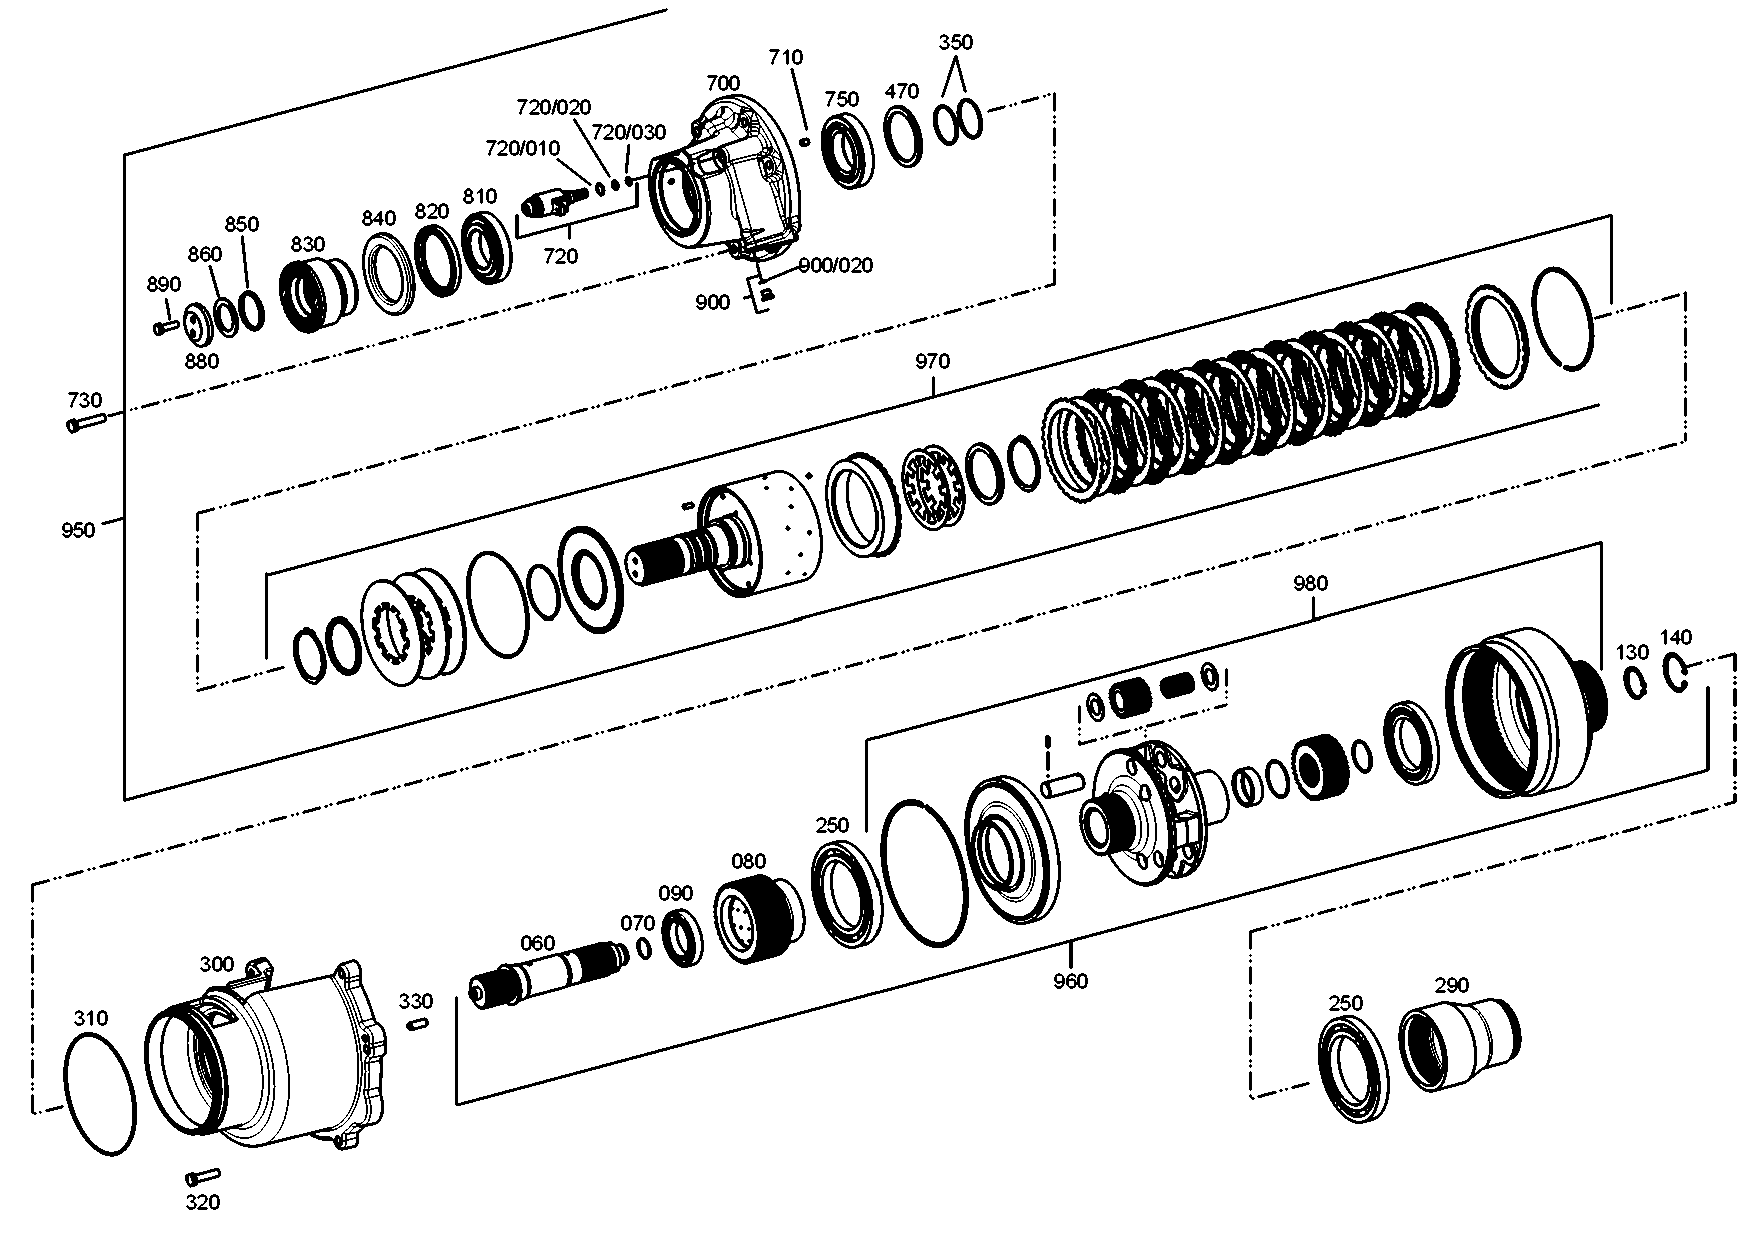 drawing for MOXY TRUCKS AS 352010 - SHAFT SEAL (figure 5)